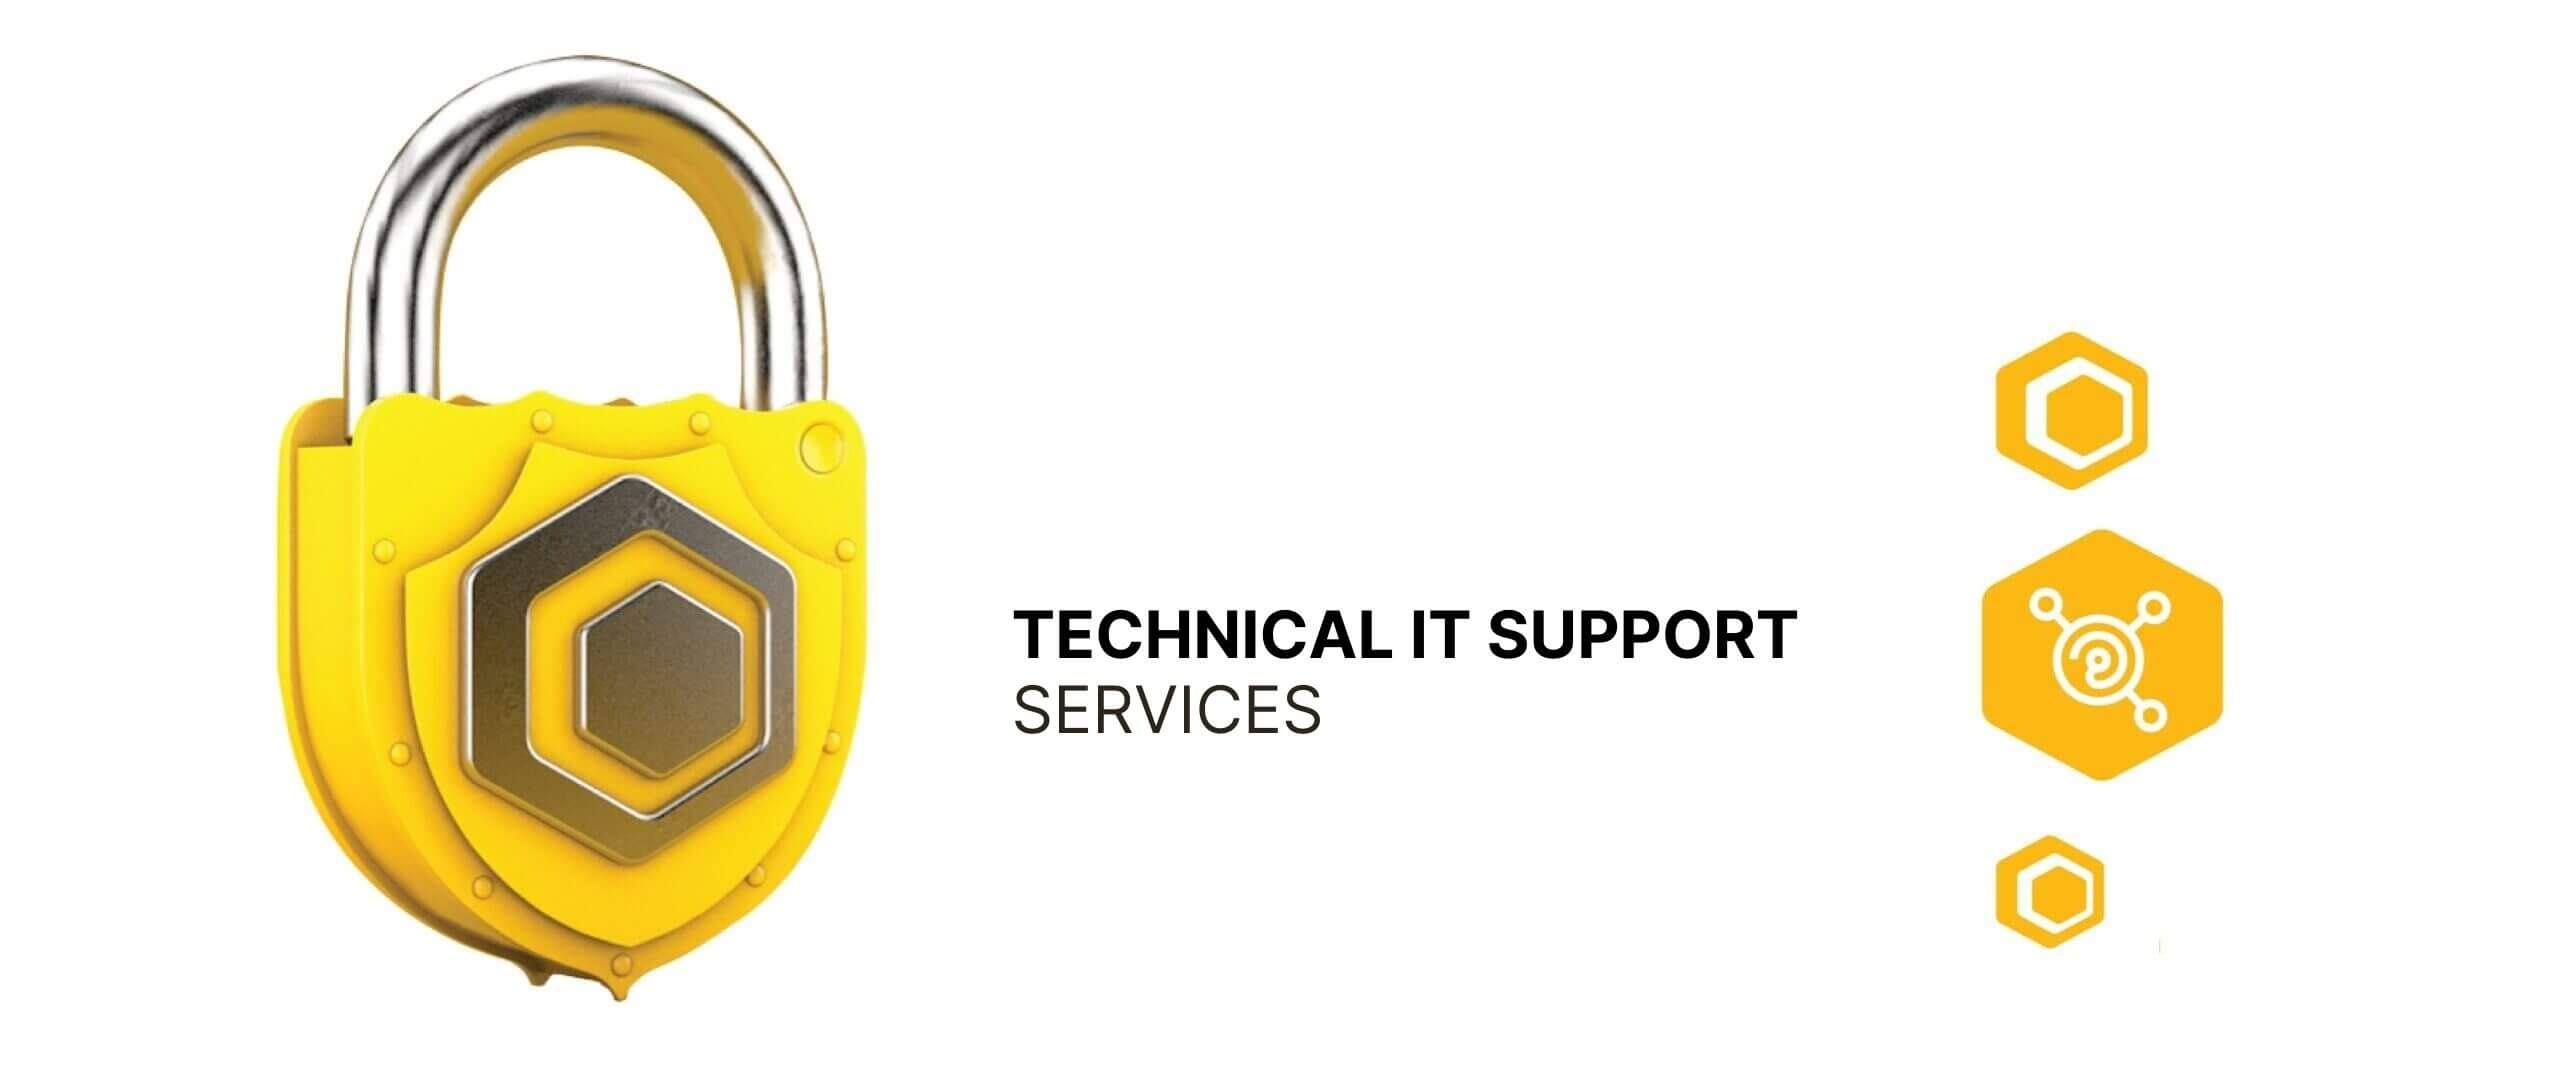 Technical IT Support - beeasy